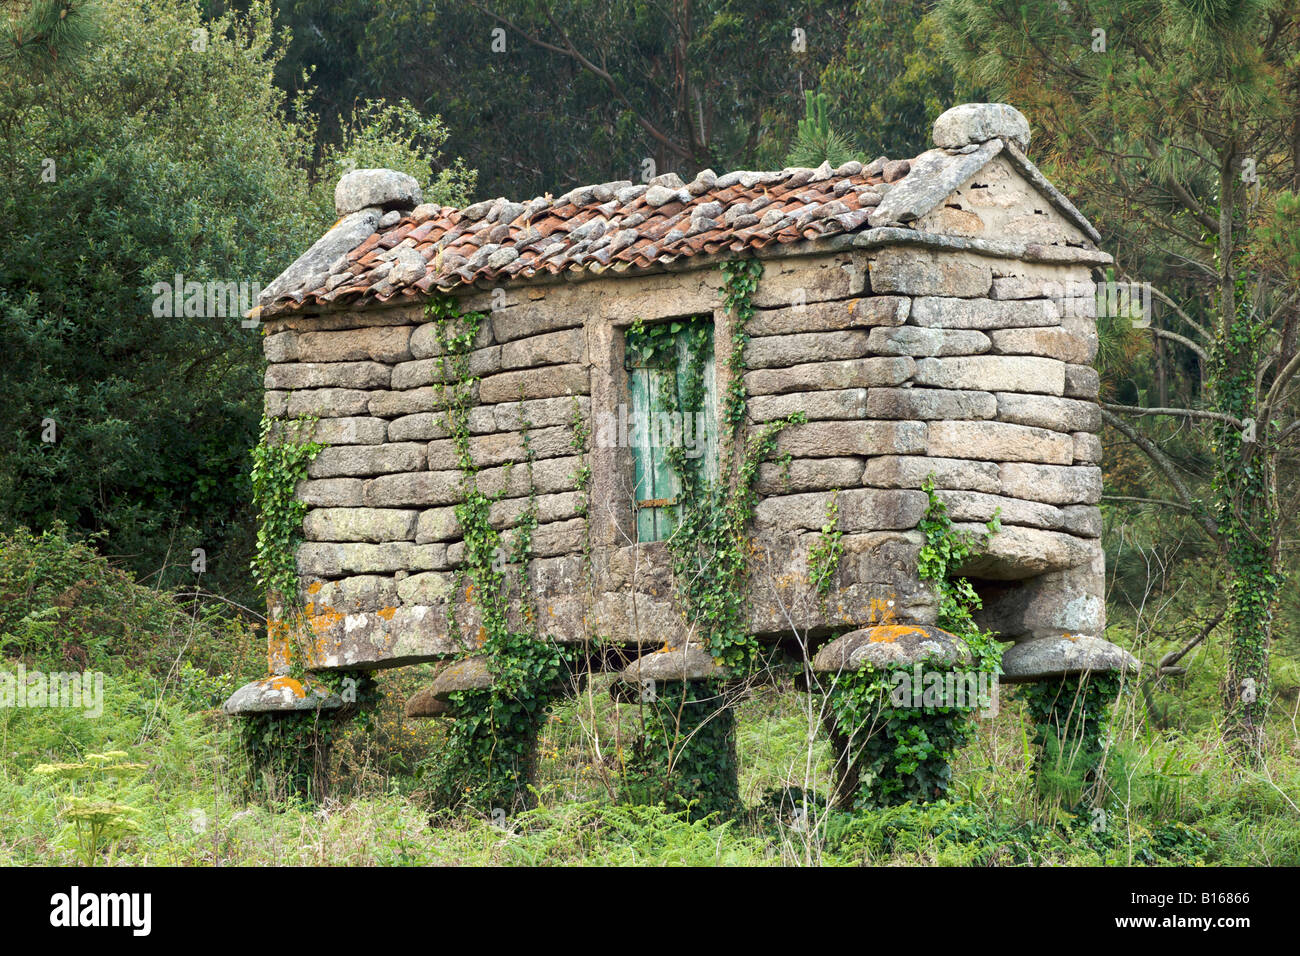 A stone horreo, (a traditional store for maize corn) in Galicia, a region of northwestern Spain. Stock Photo